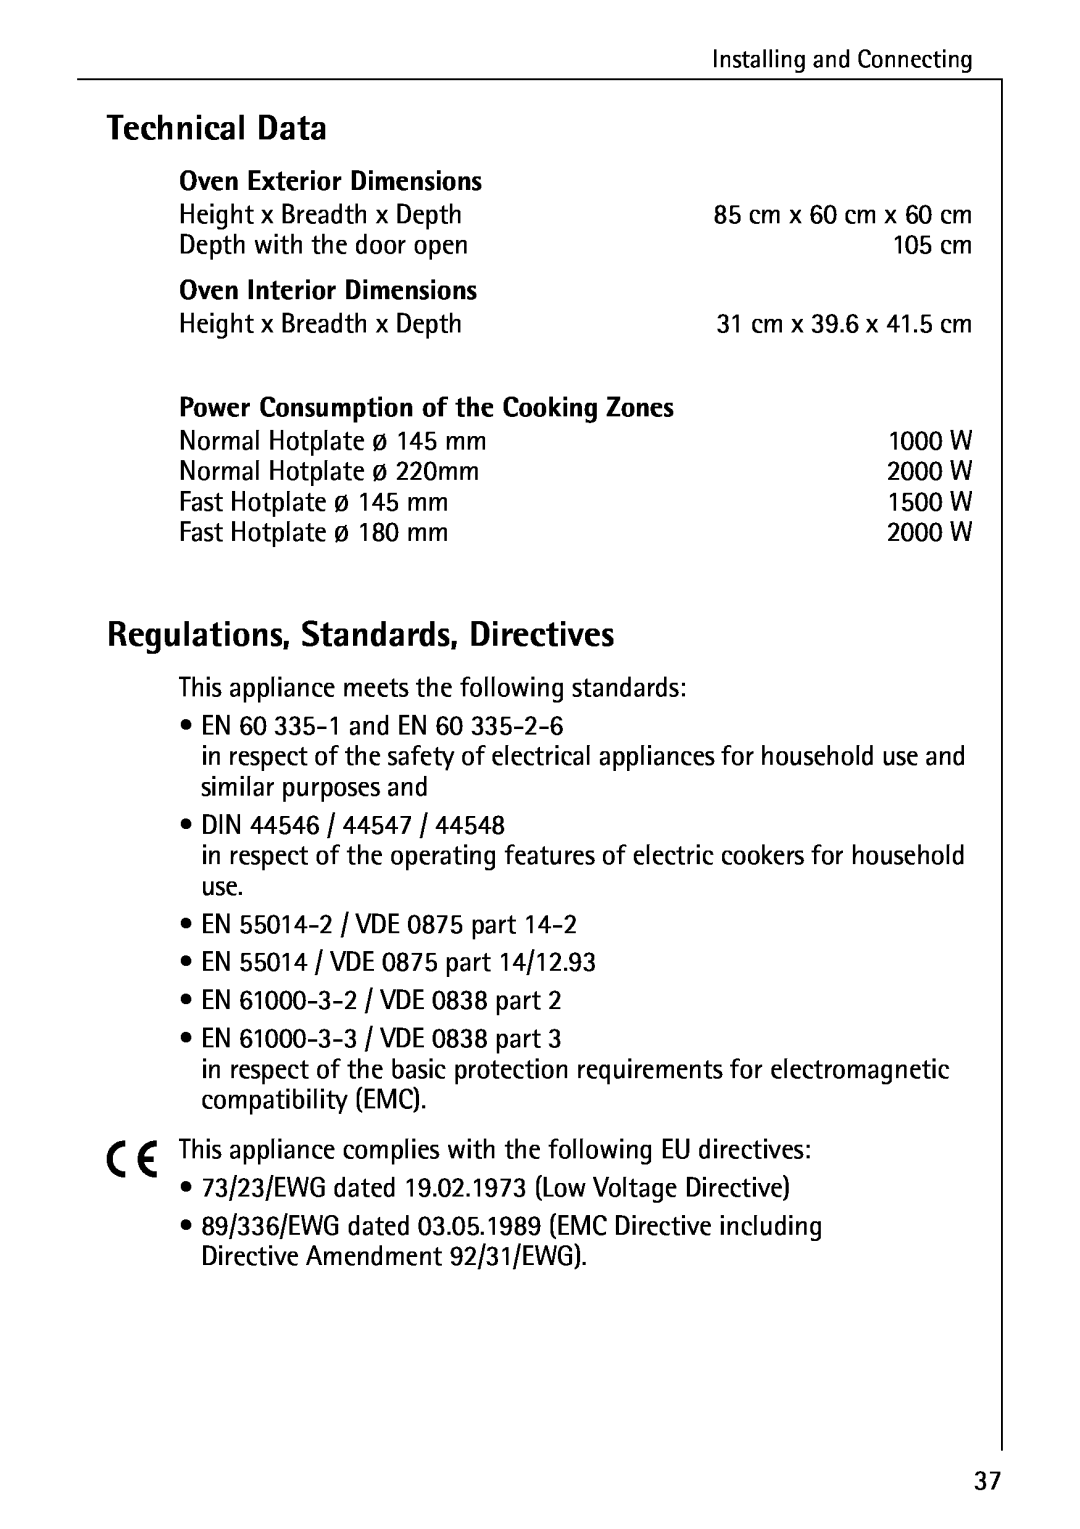 AEG 2003 F Technical Data, Regulations, Standards, Directives, Oven Exterior Dimensions, Oven Interior Dimensions 